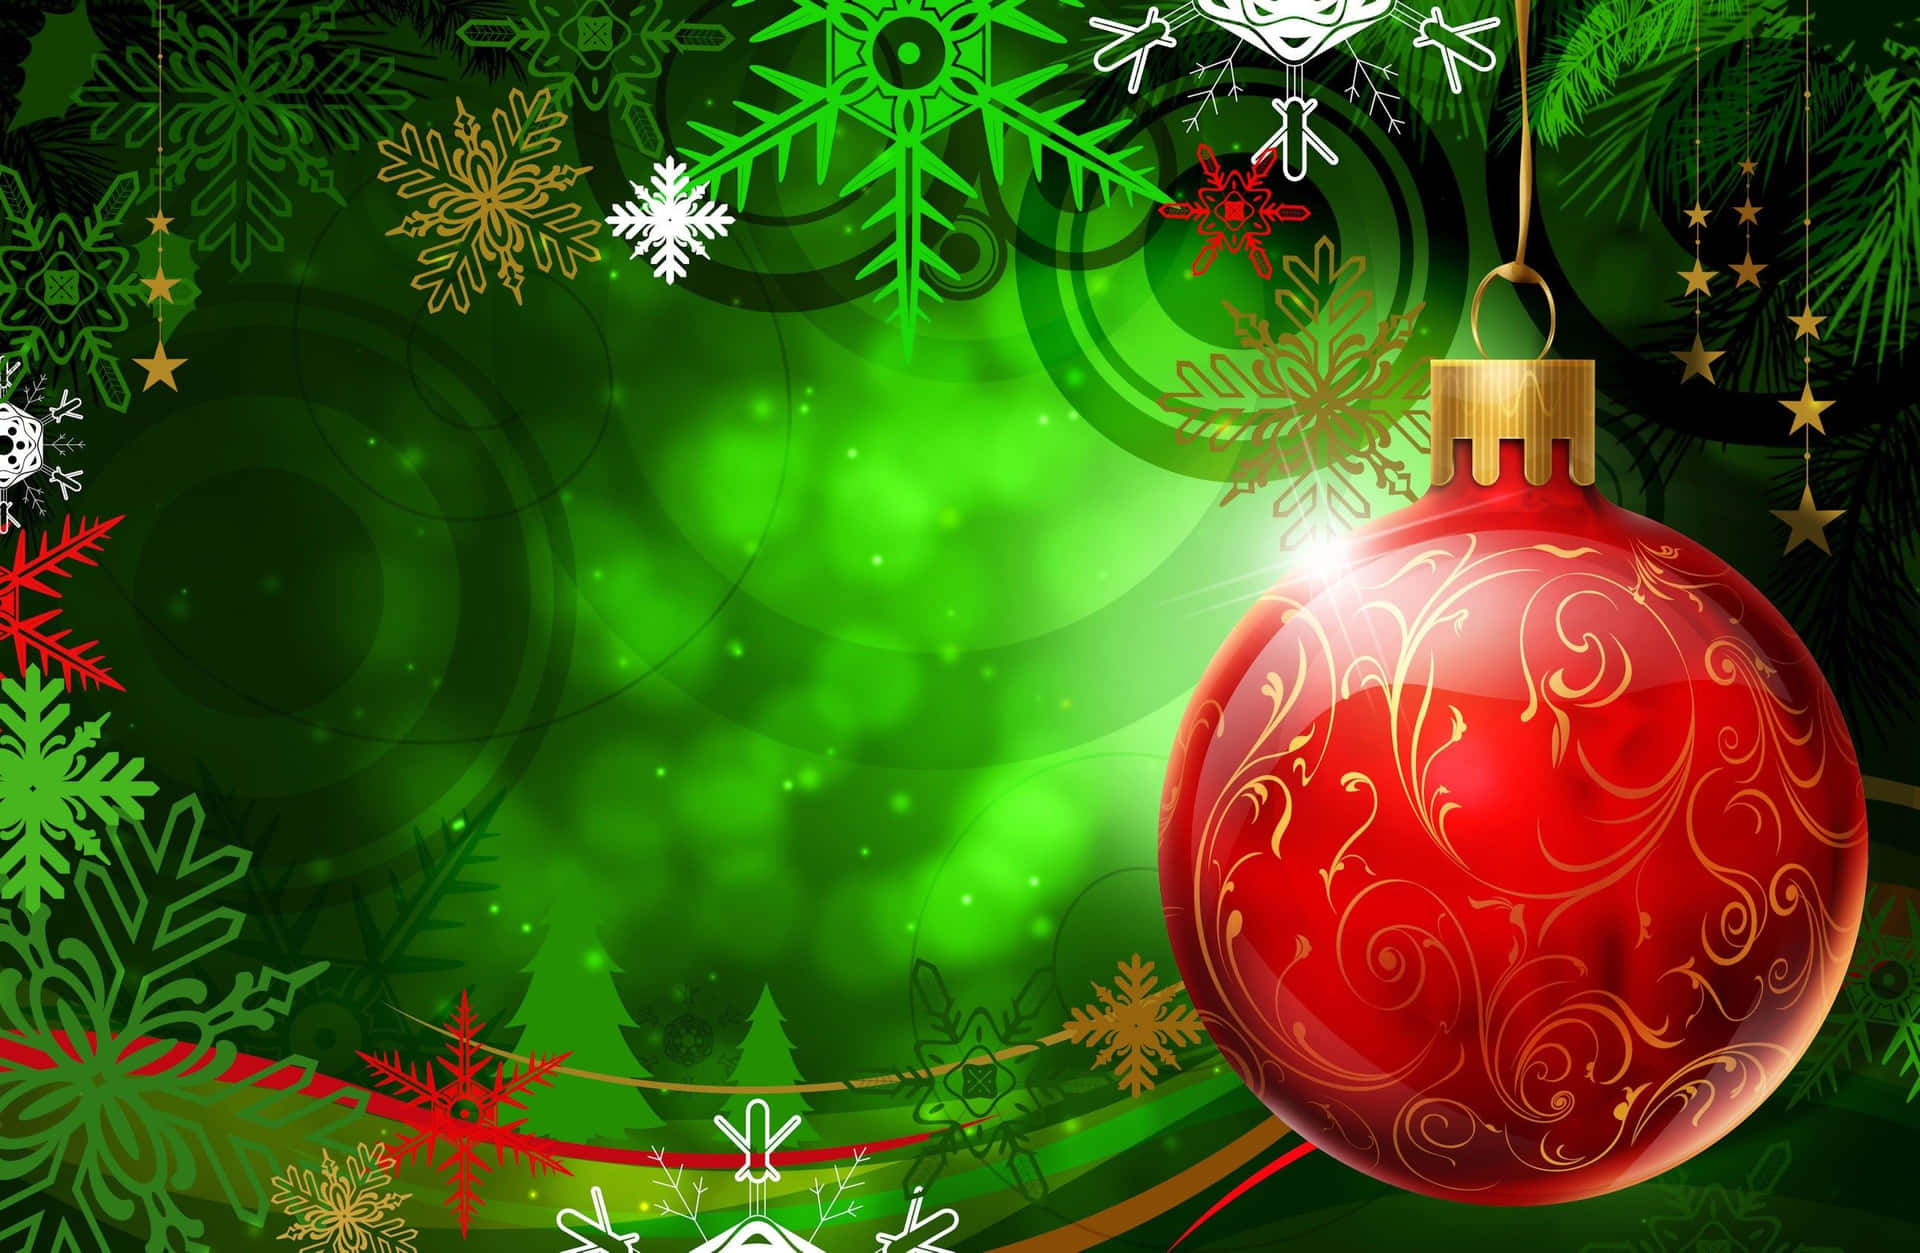 Red And Green Christmas Wallpaper